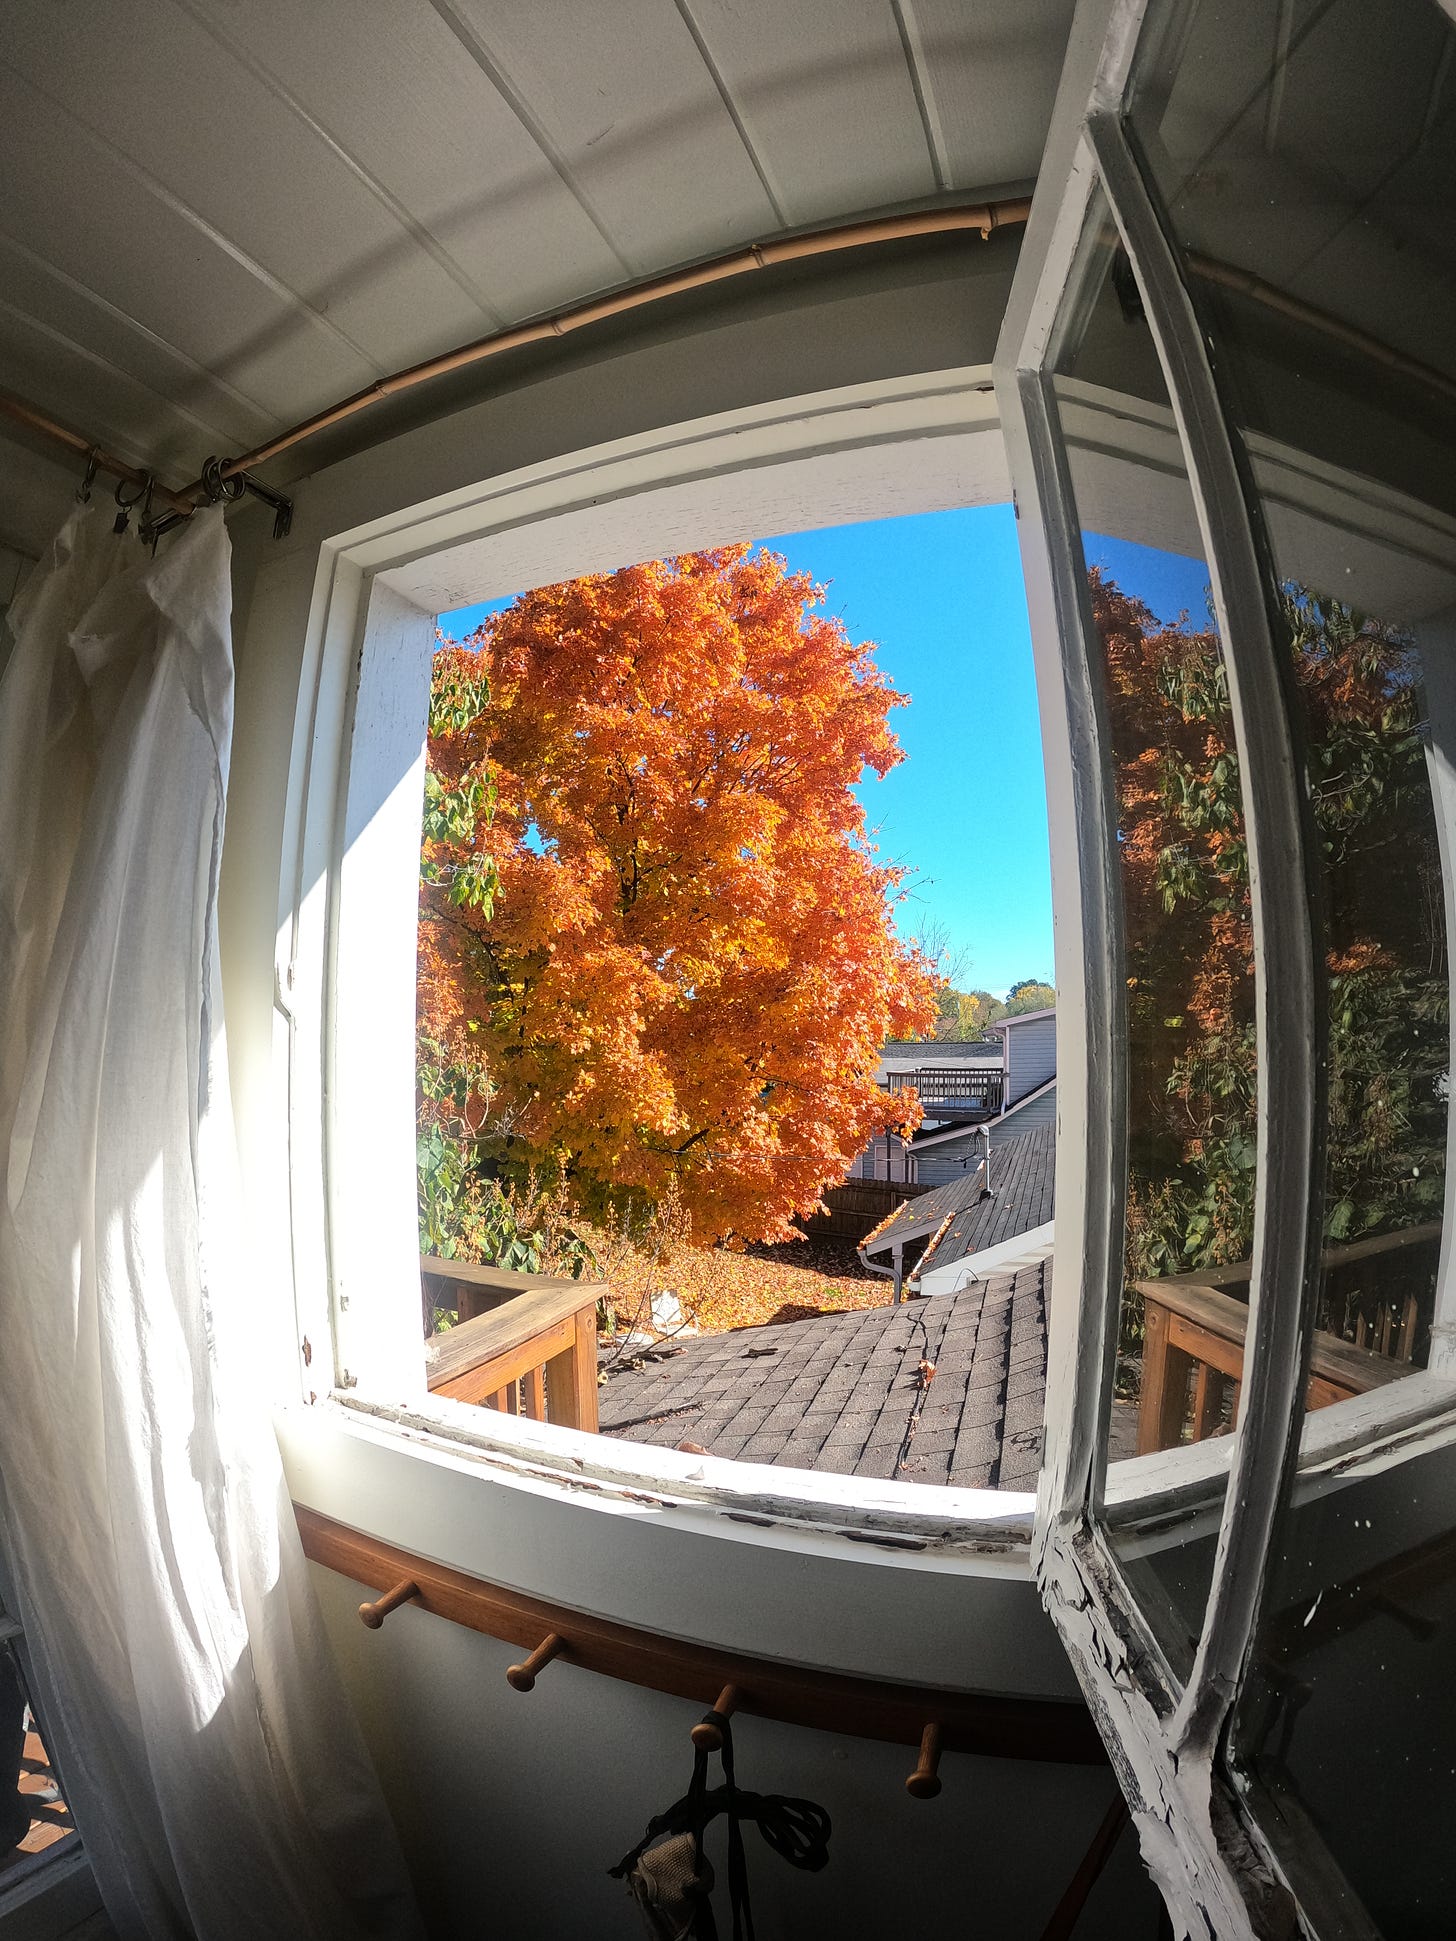 Amazing orange fall tree outside out Airbnb window